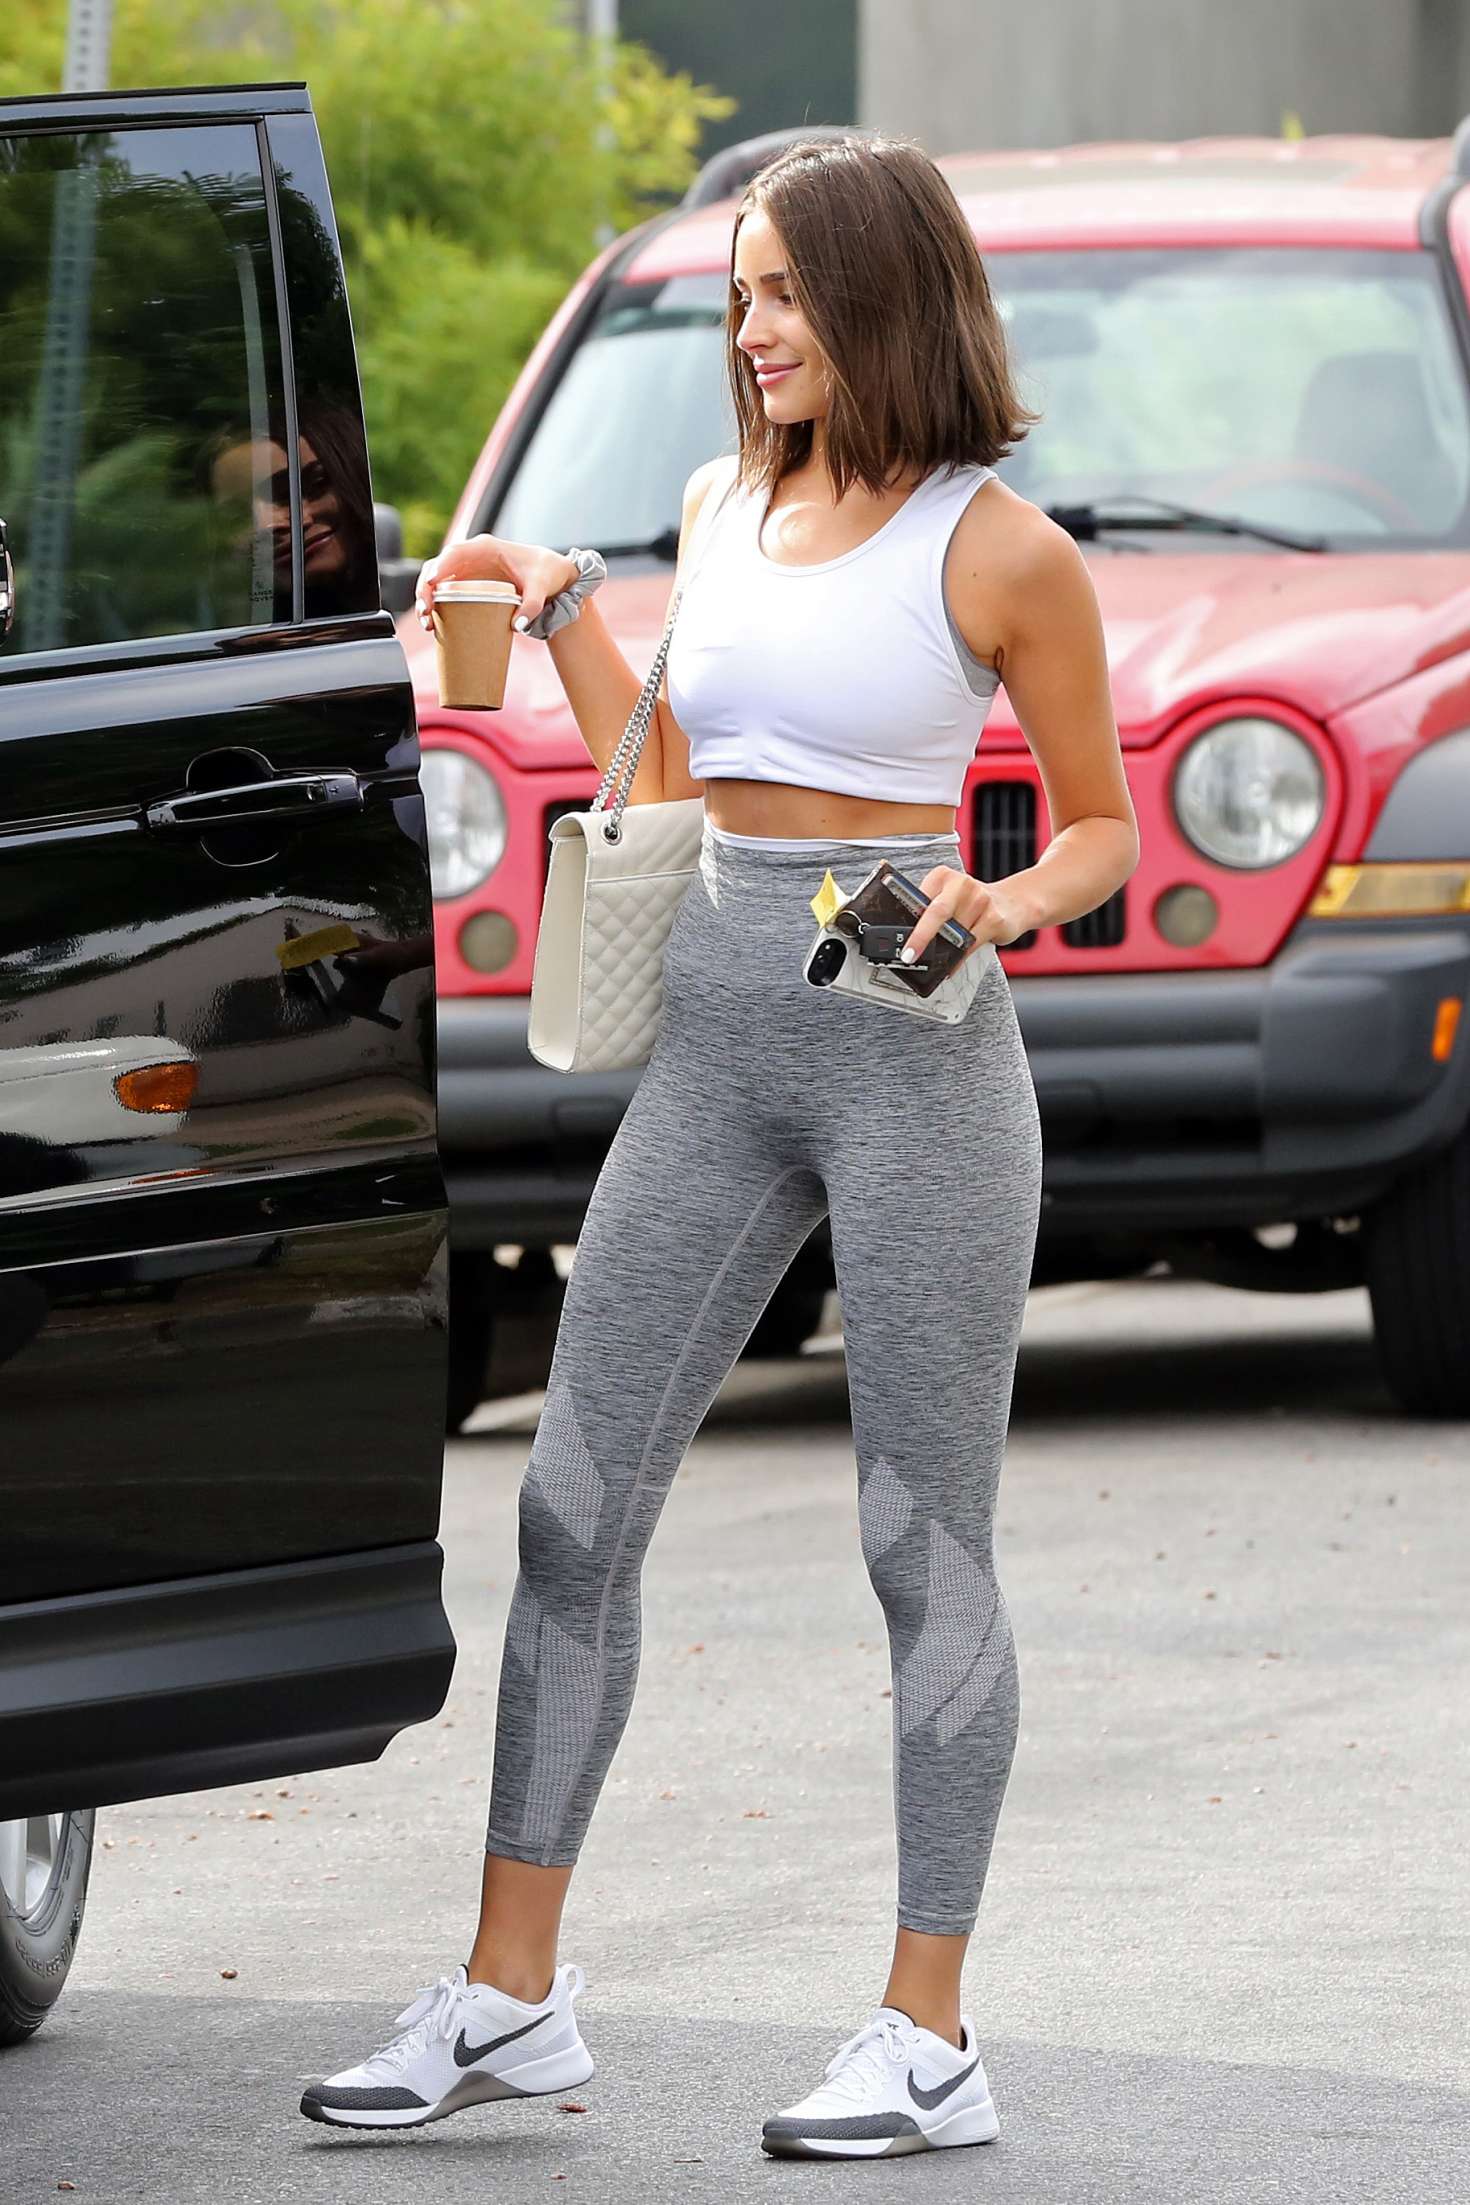 Olivia Culpo in Leggings and Crop Top â€“ Heads to workout in Los Angeles